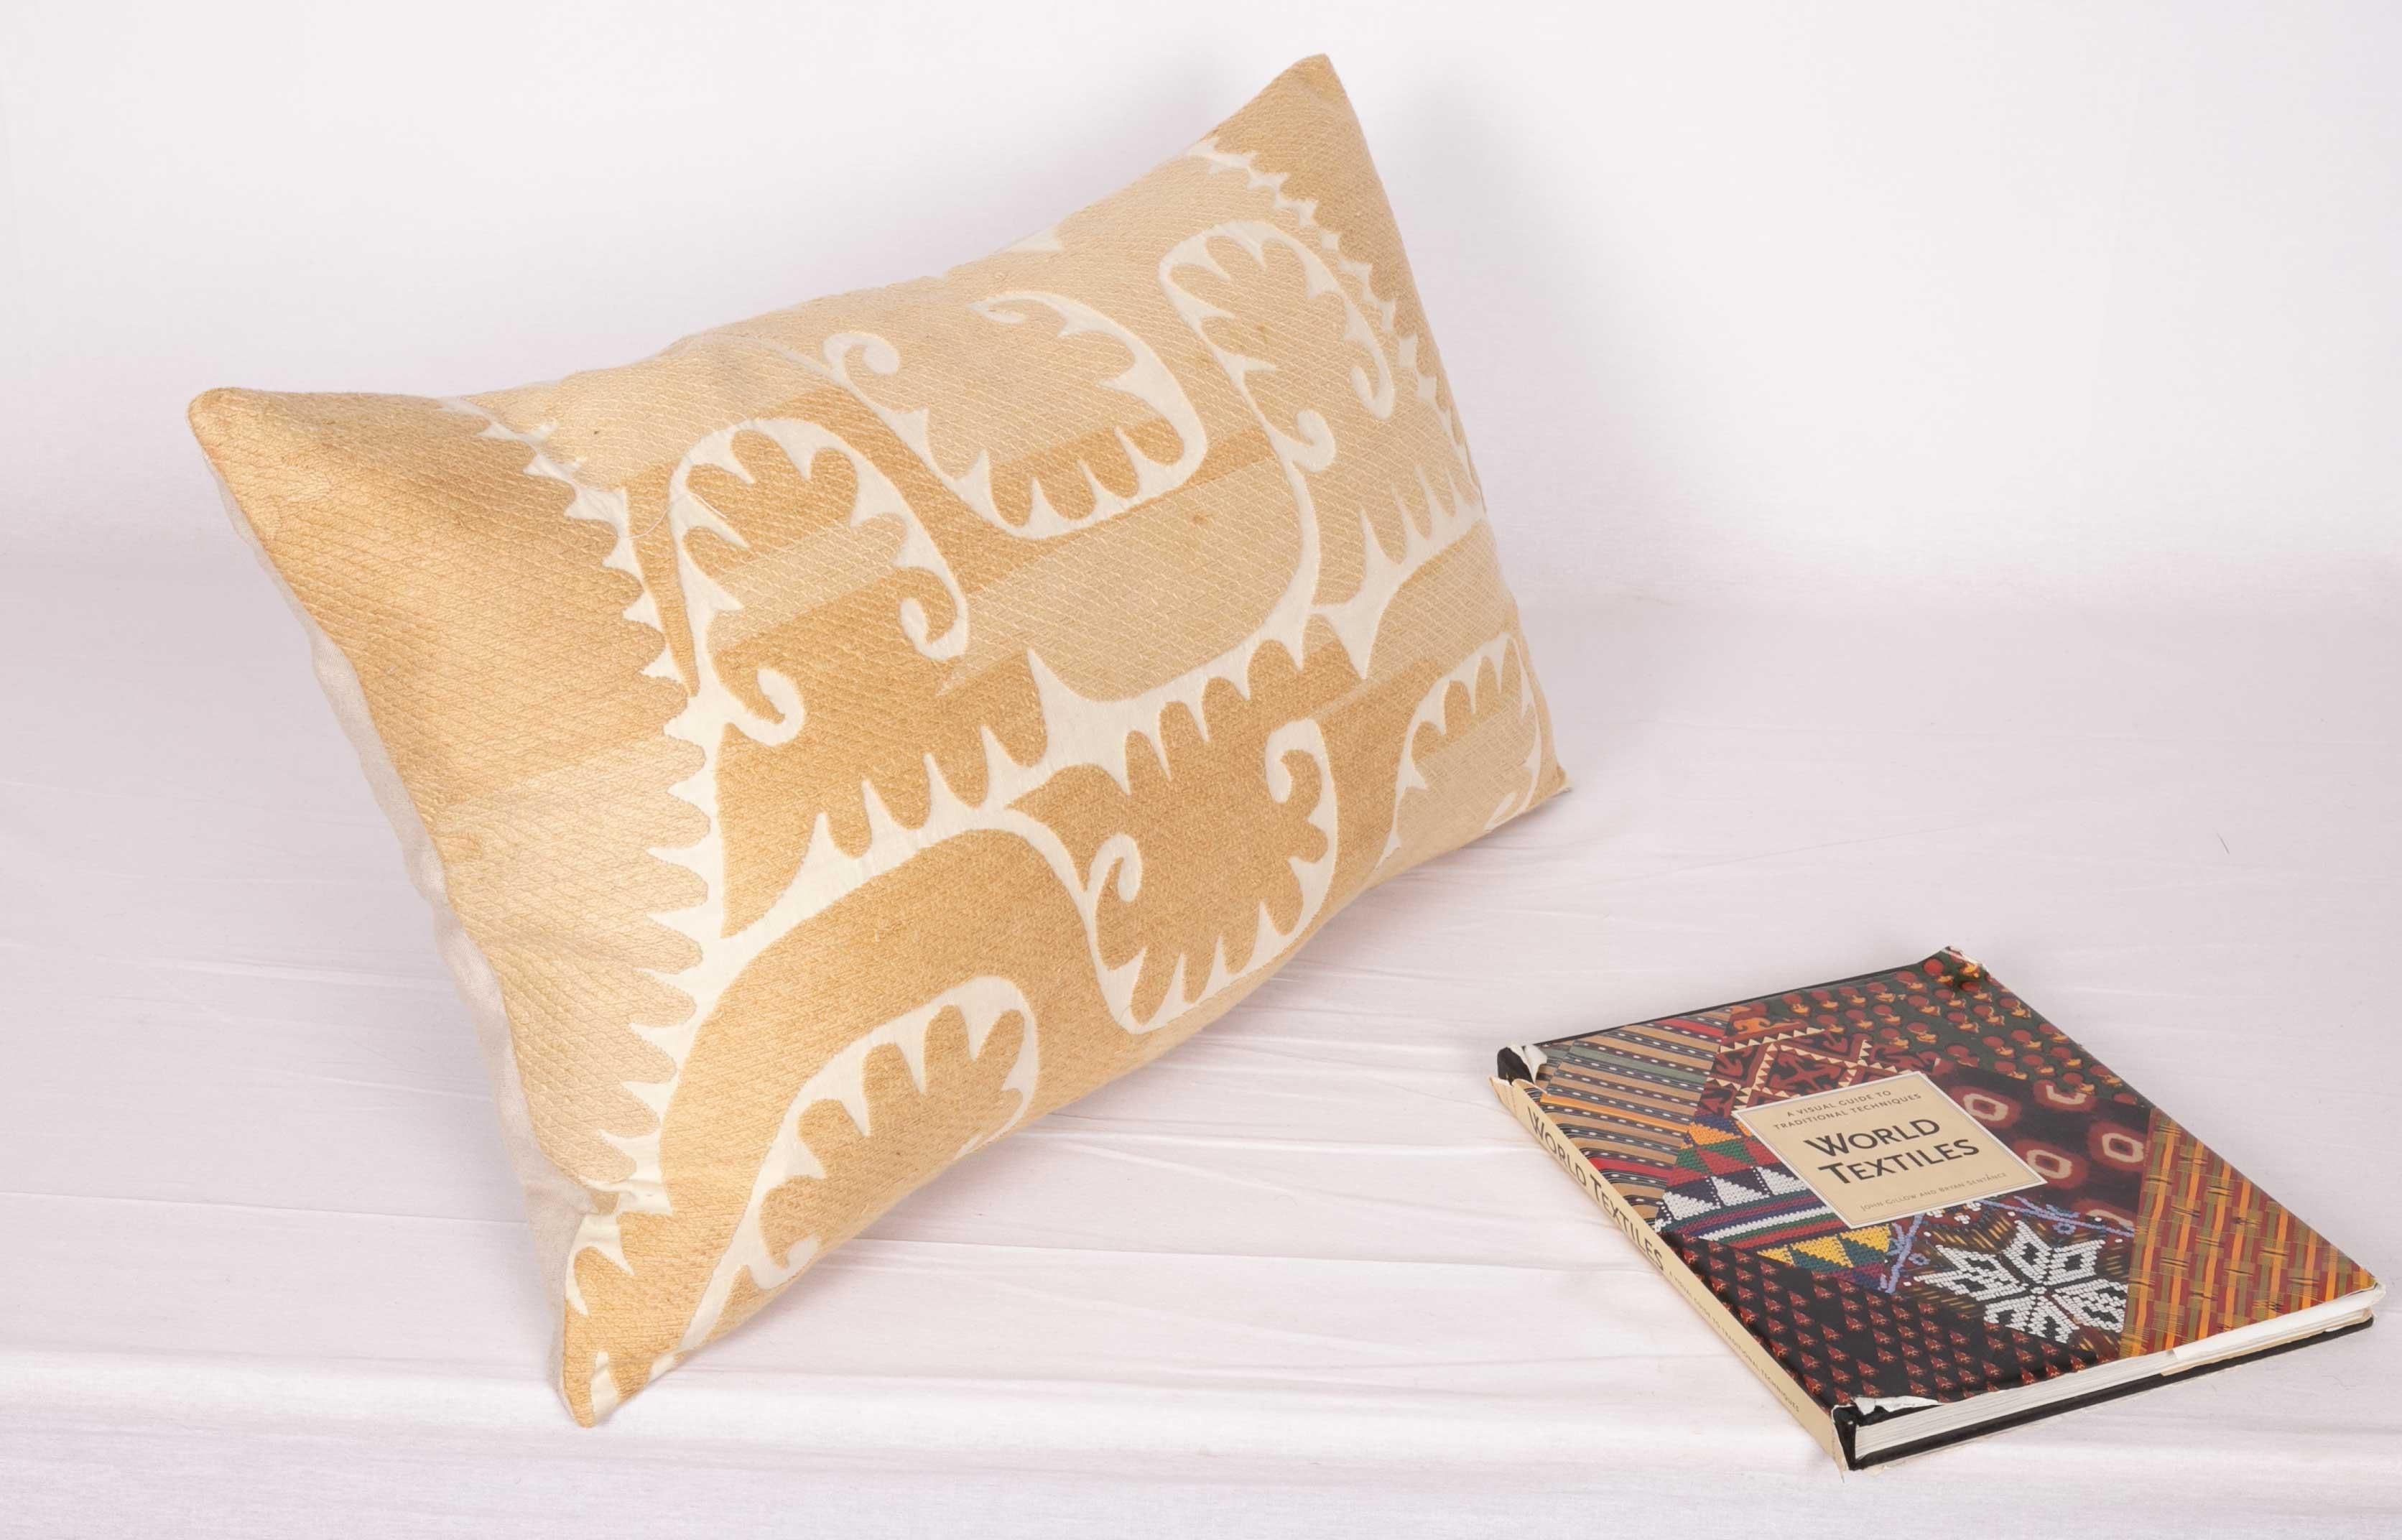 Embroidered Vintage Neutral Suzani Pillow Fashioned from a Mid-20th Century Samarkand Suzani